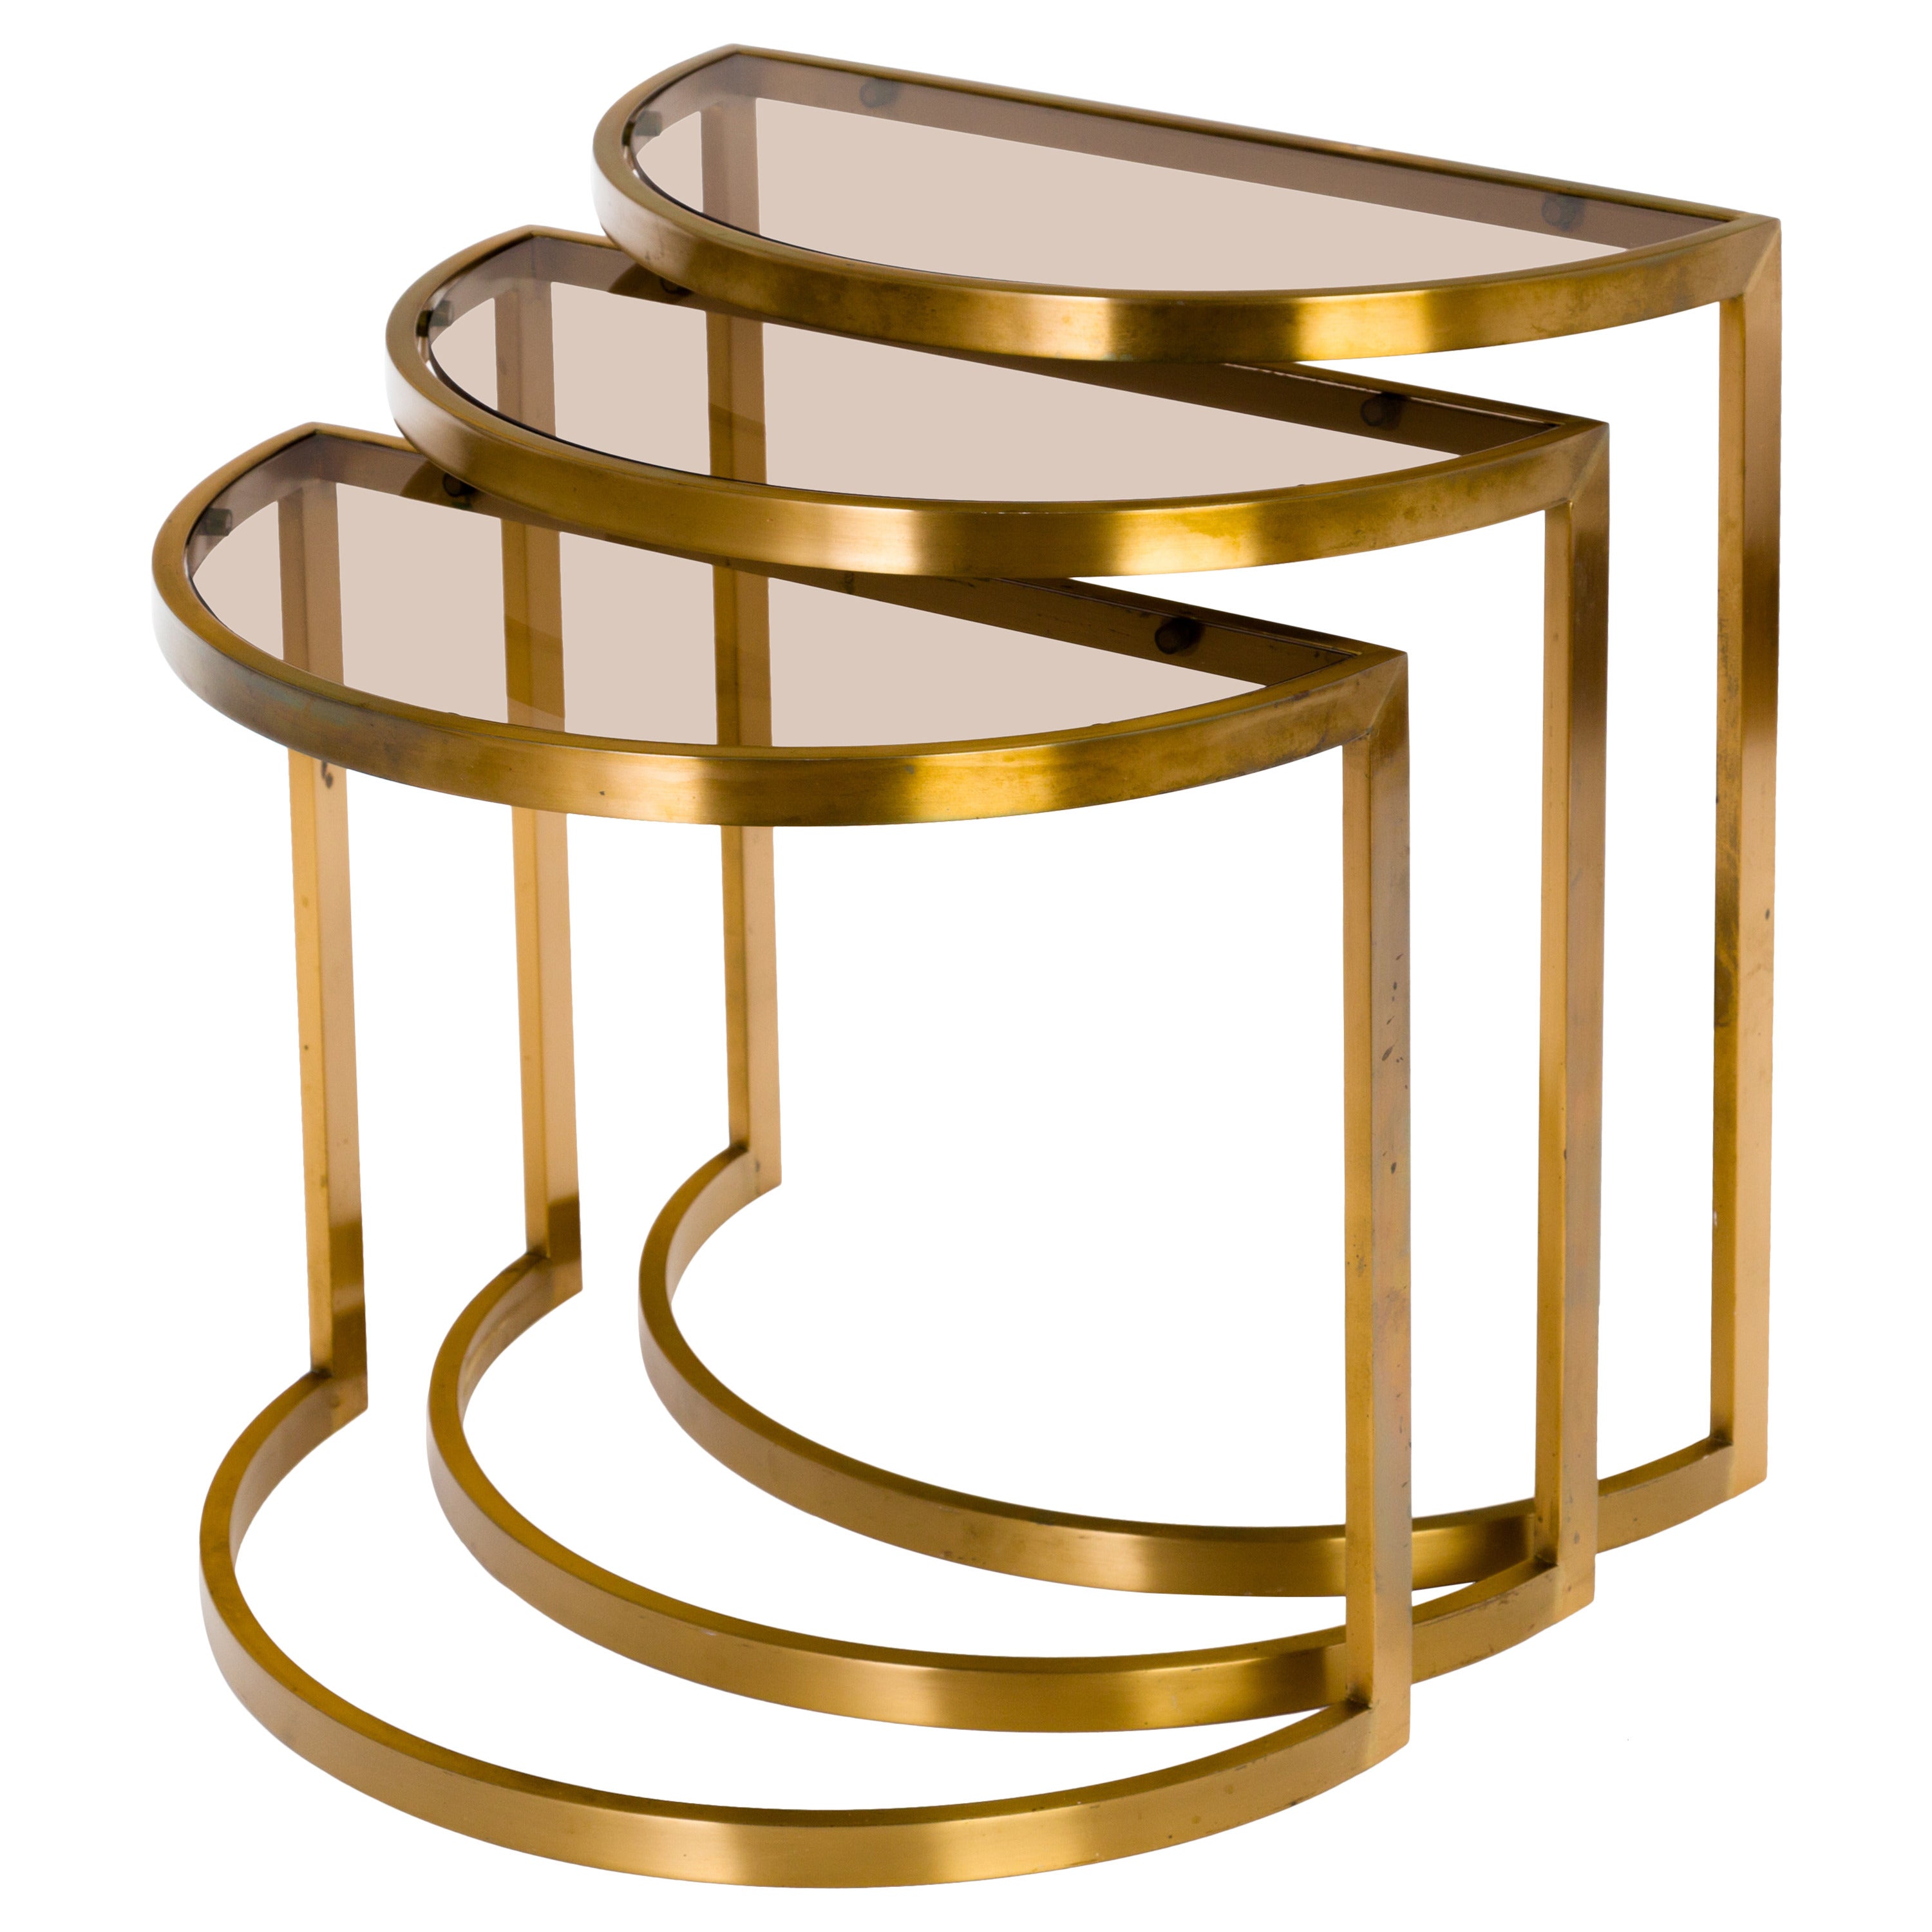 Set of Three 1960s Modern Nesting Tables in Brass and Glass